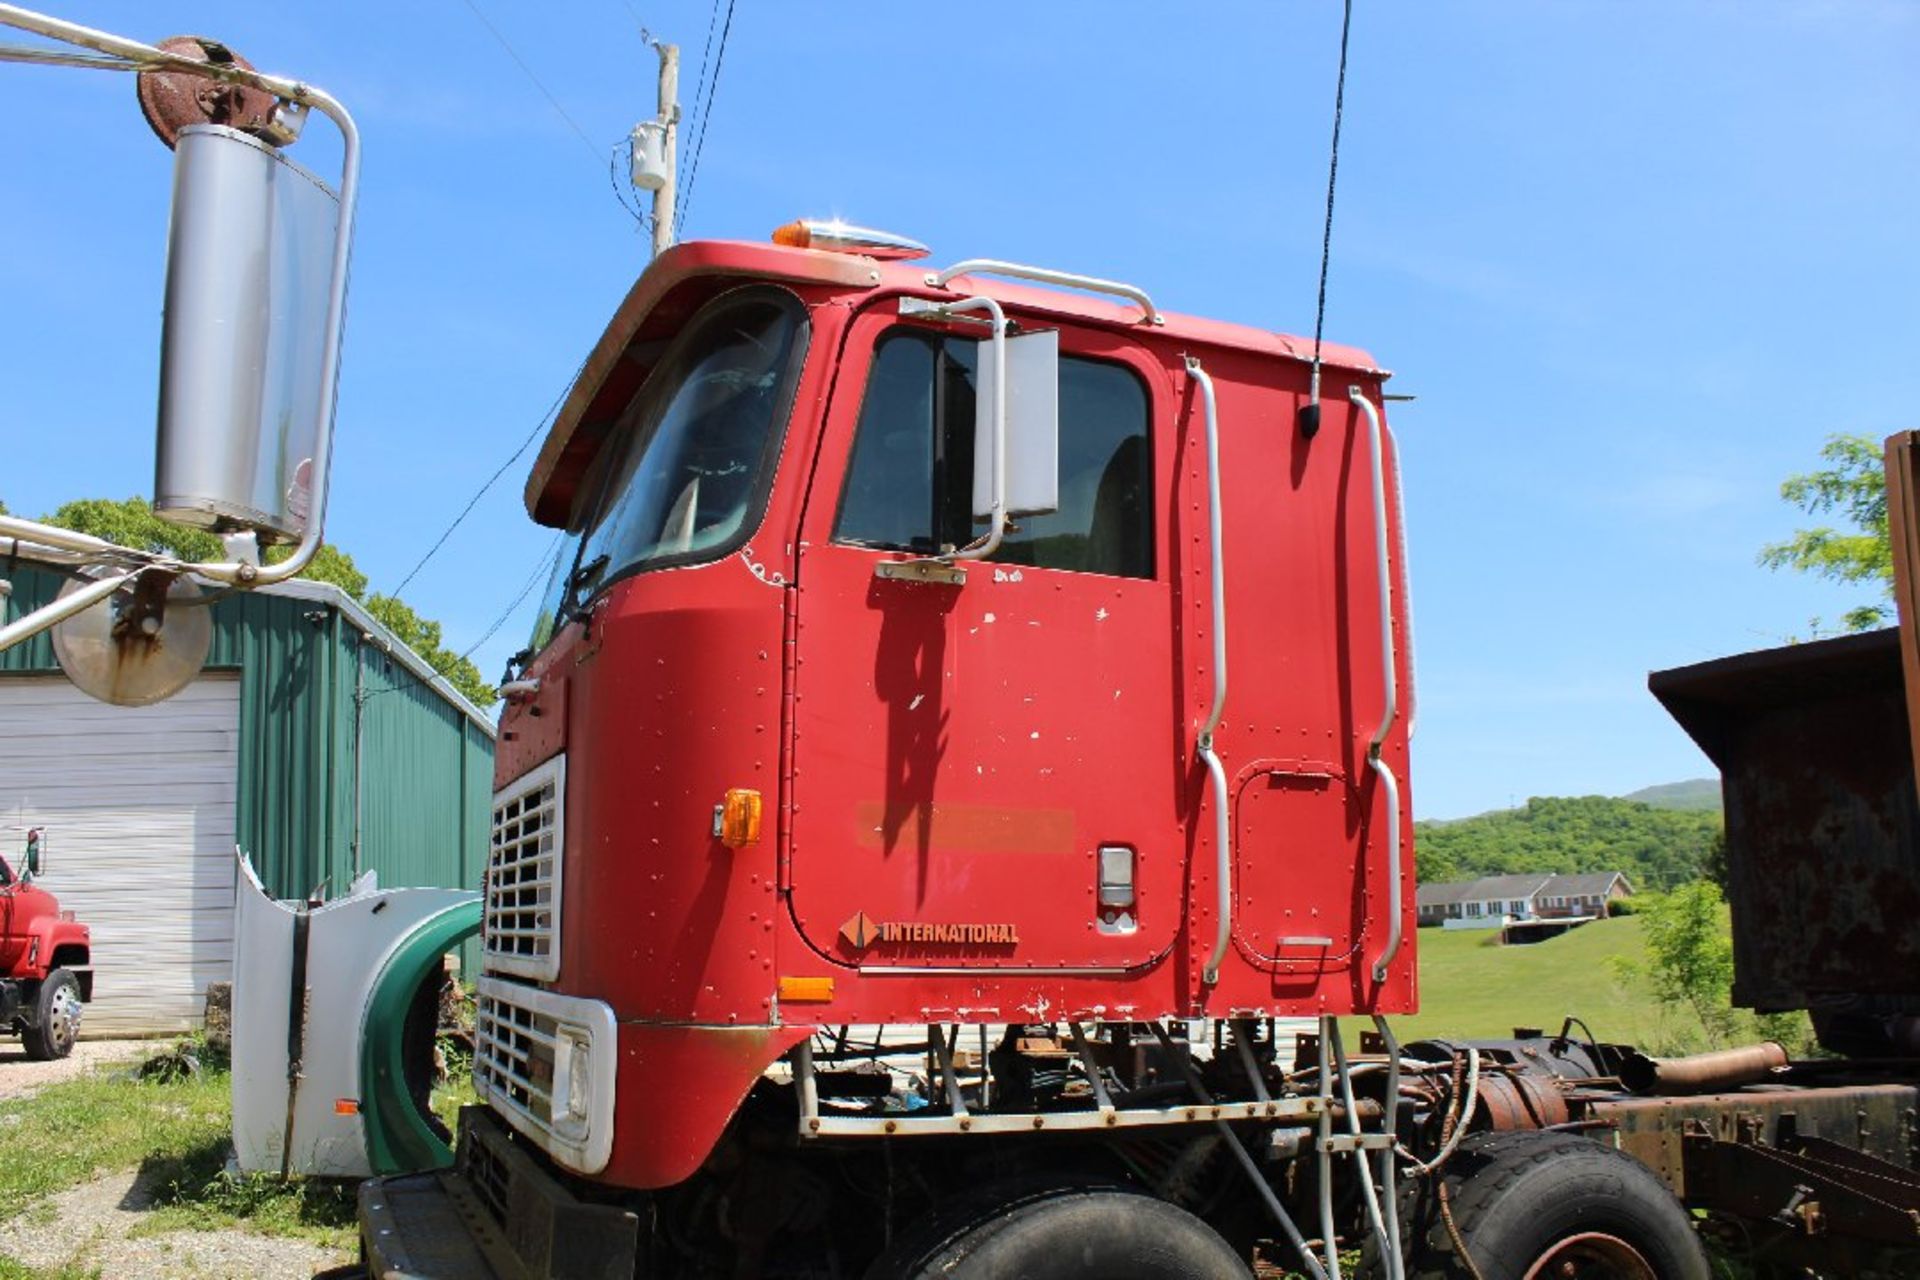 1980 International Day Cab Road Tractor, Salvage, No Motor or Transmission, NO TITLE EVER. Item - Image 3 of 4